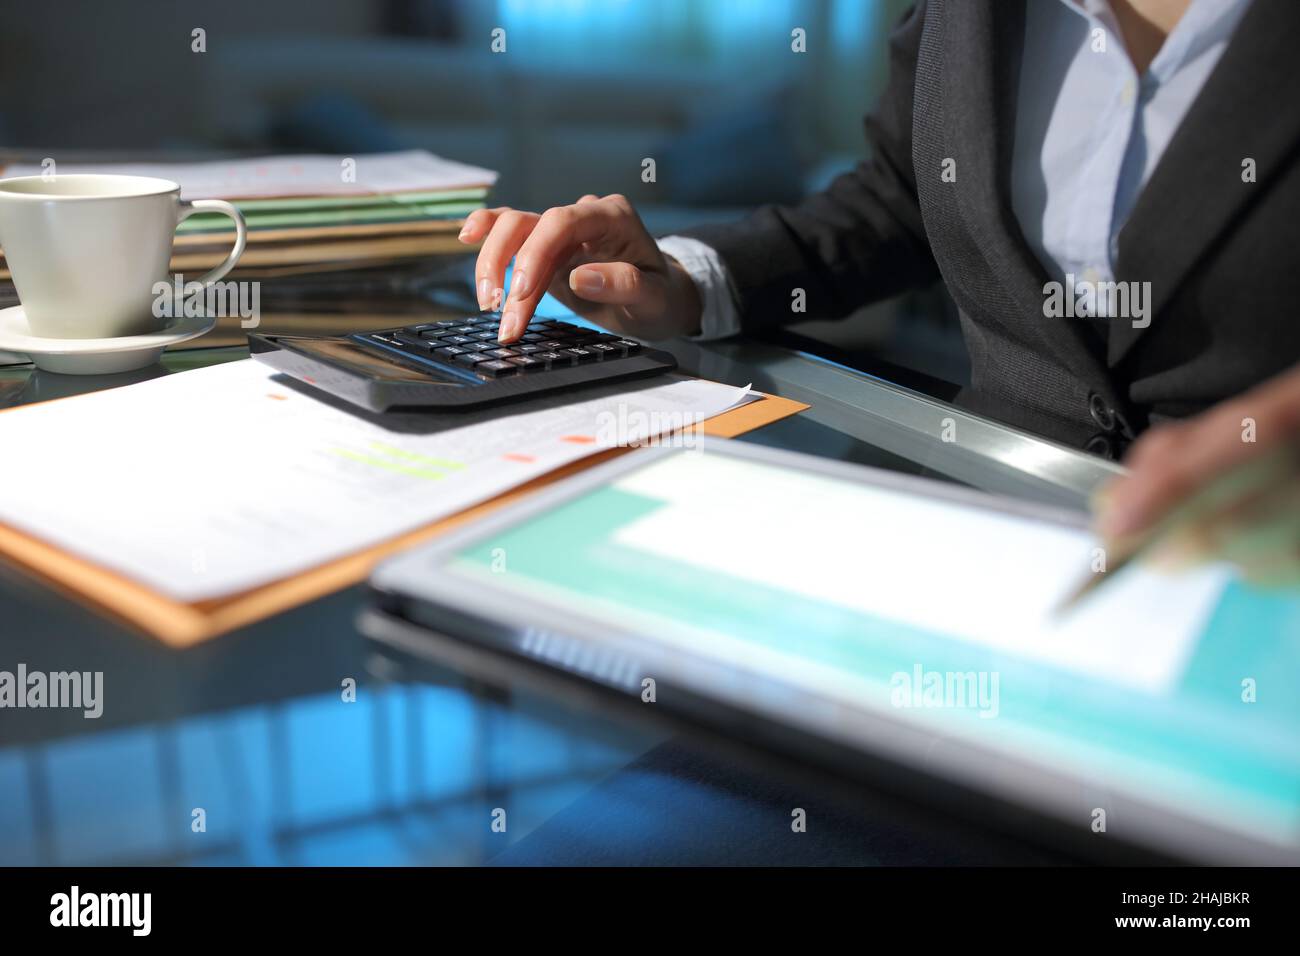 Businesswoman hand accounting using calculator and tablet on a desk in the night at office Stock Photo